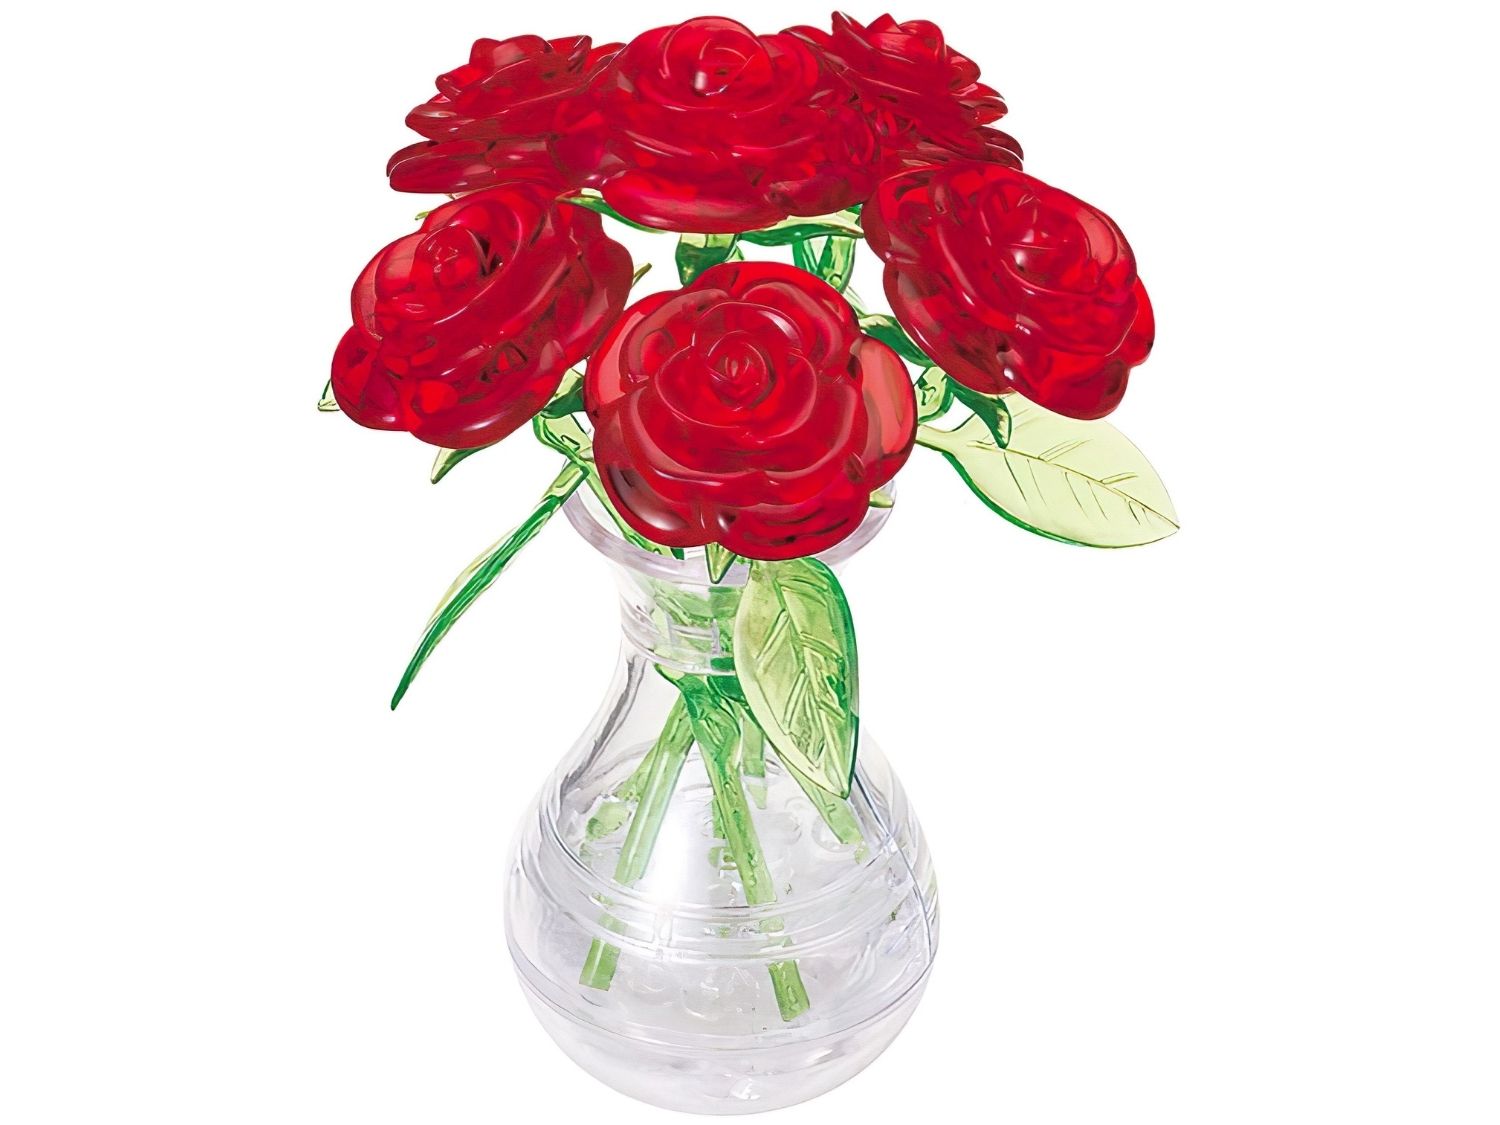 Beverly • Flower • Six Red Roses　47 PCS　Crystal 3D Puzzle